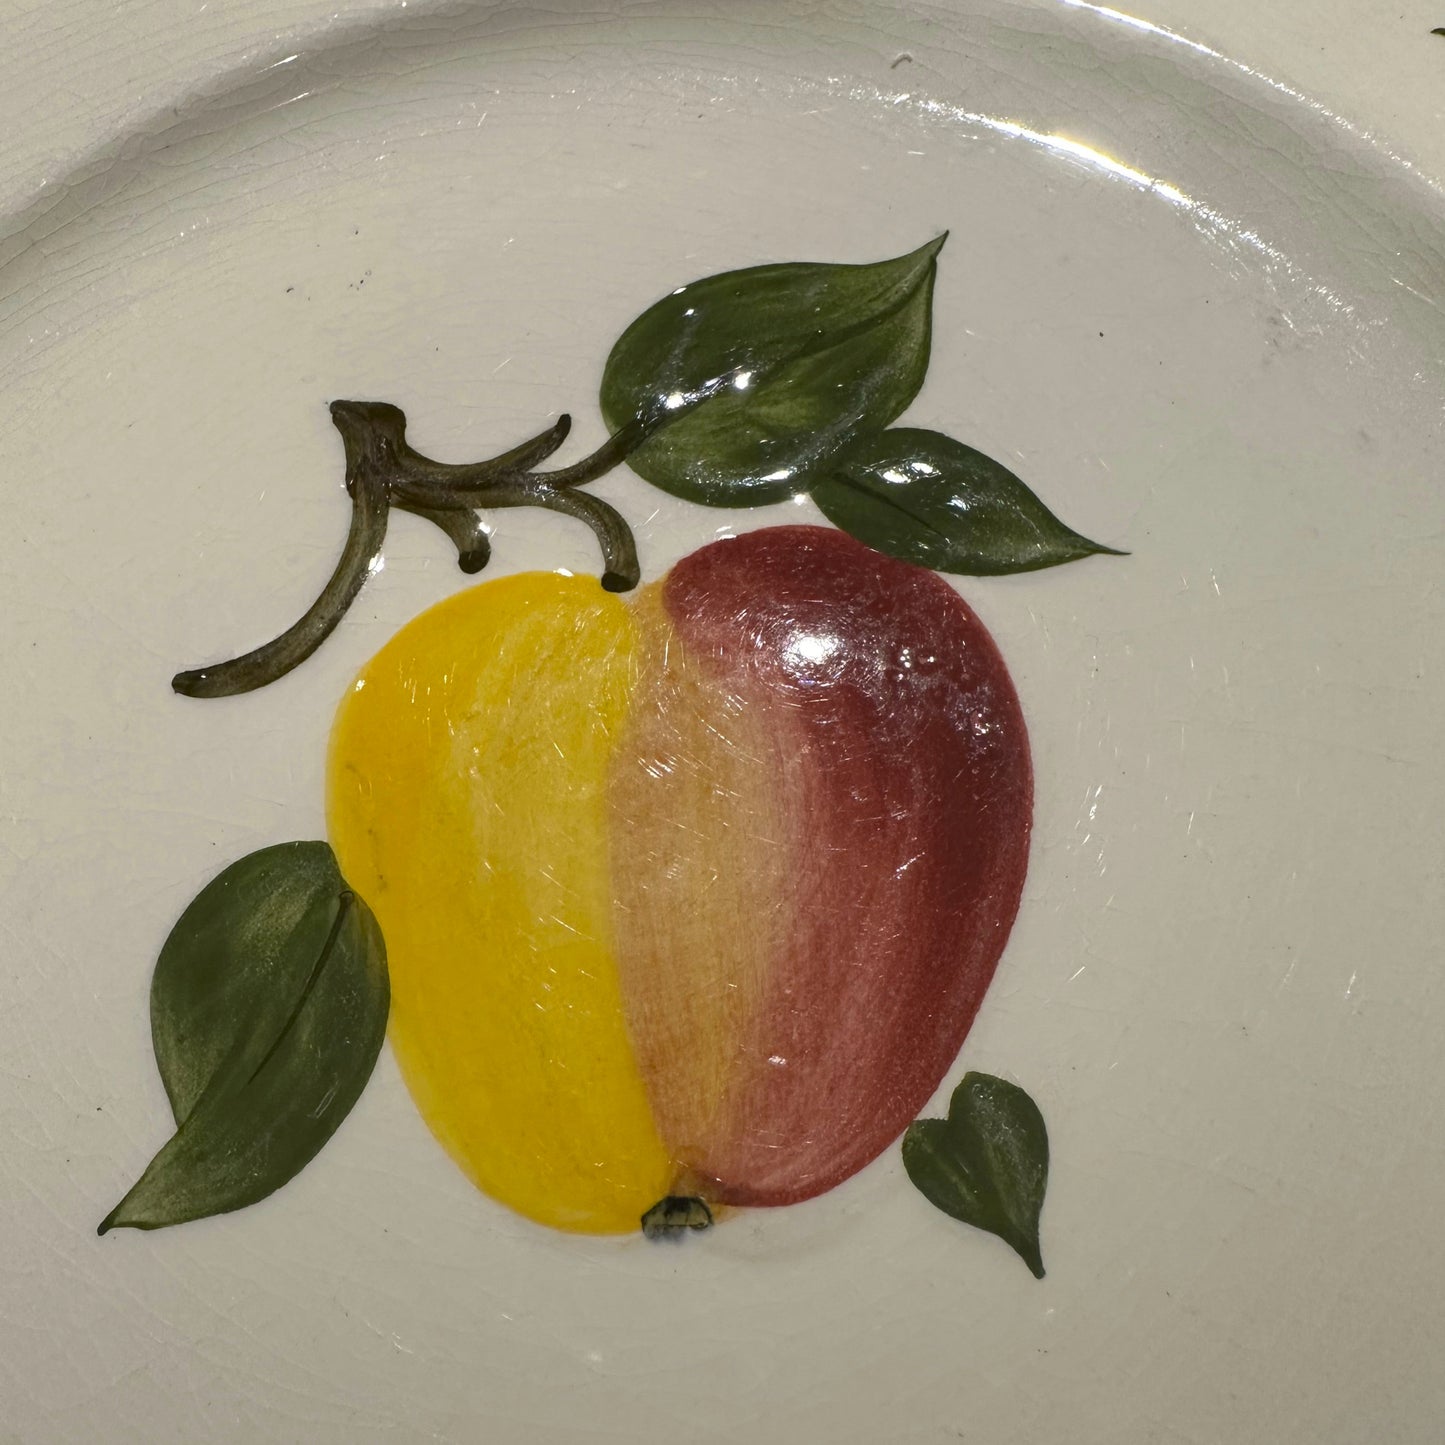 The Delicious Apple Dinner Plate by Villeroy & Boch